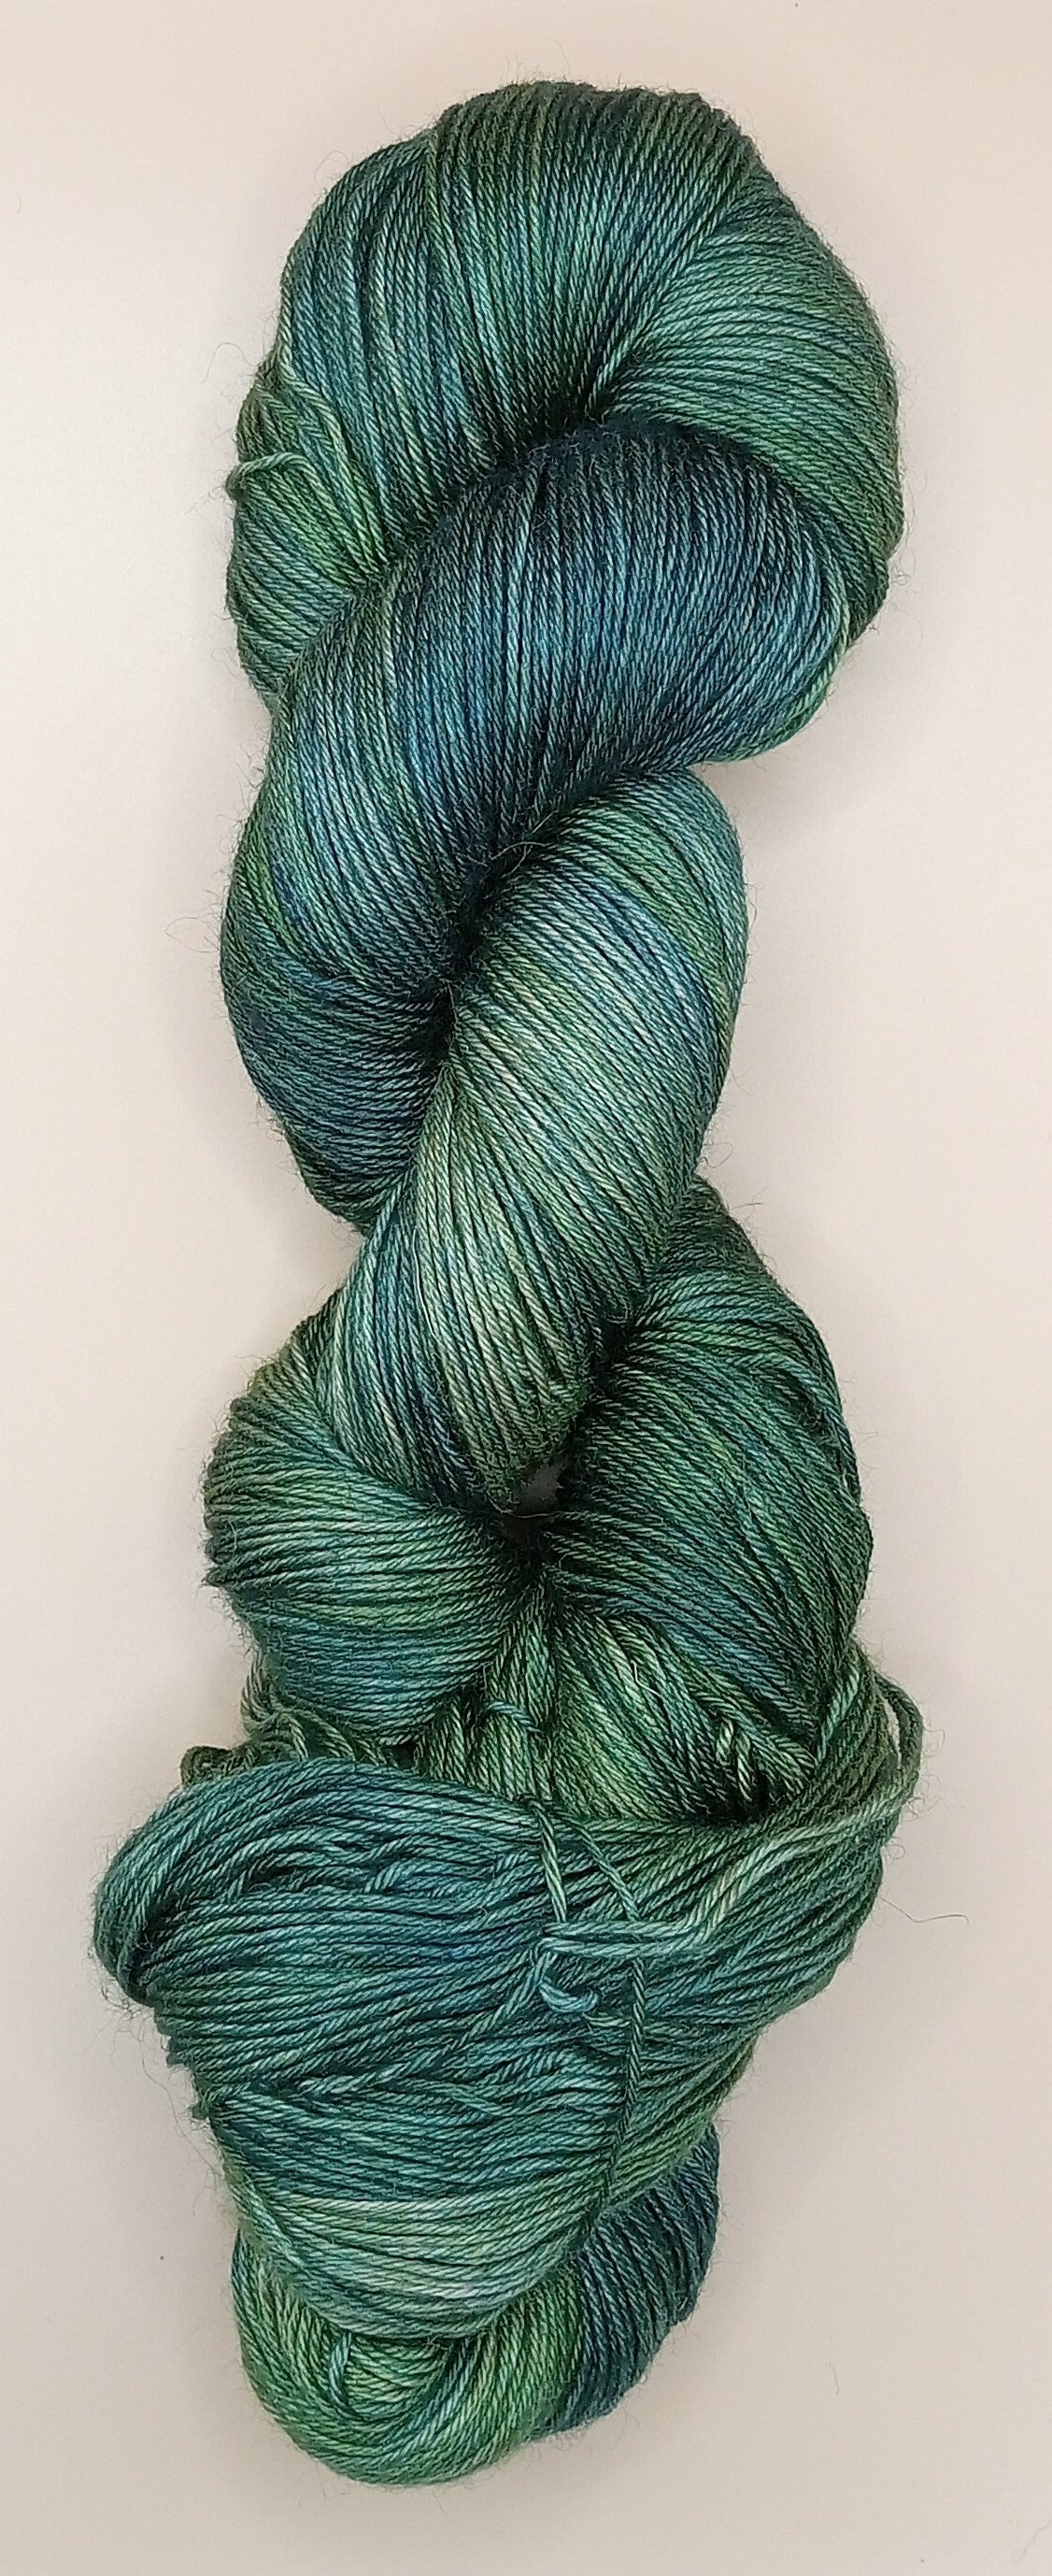 100G Bluefaced Leicester hand dyed 4 ply Yarn- "Emerald Forest" - **SALE**